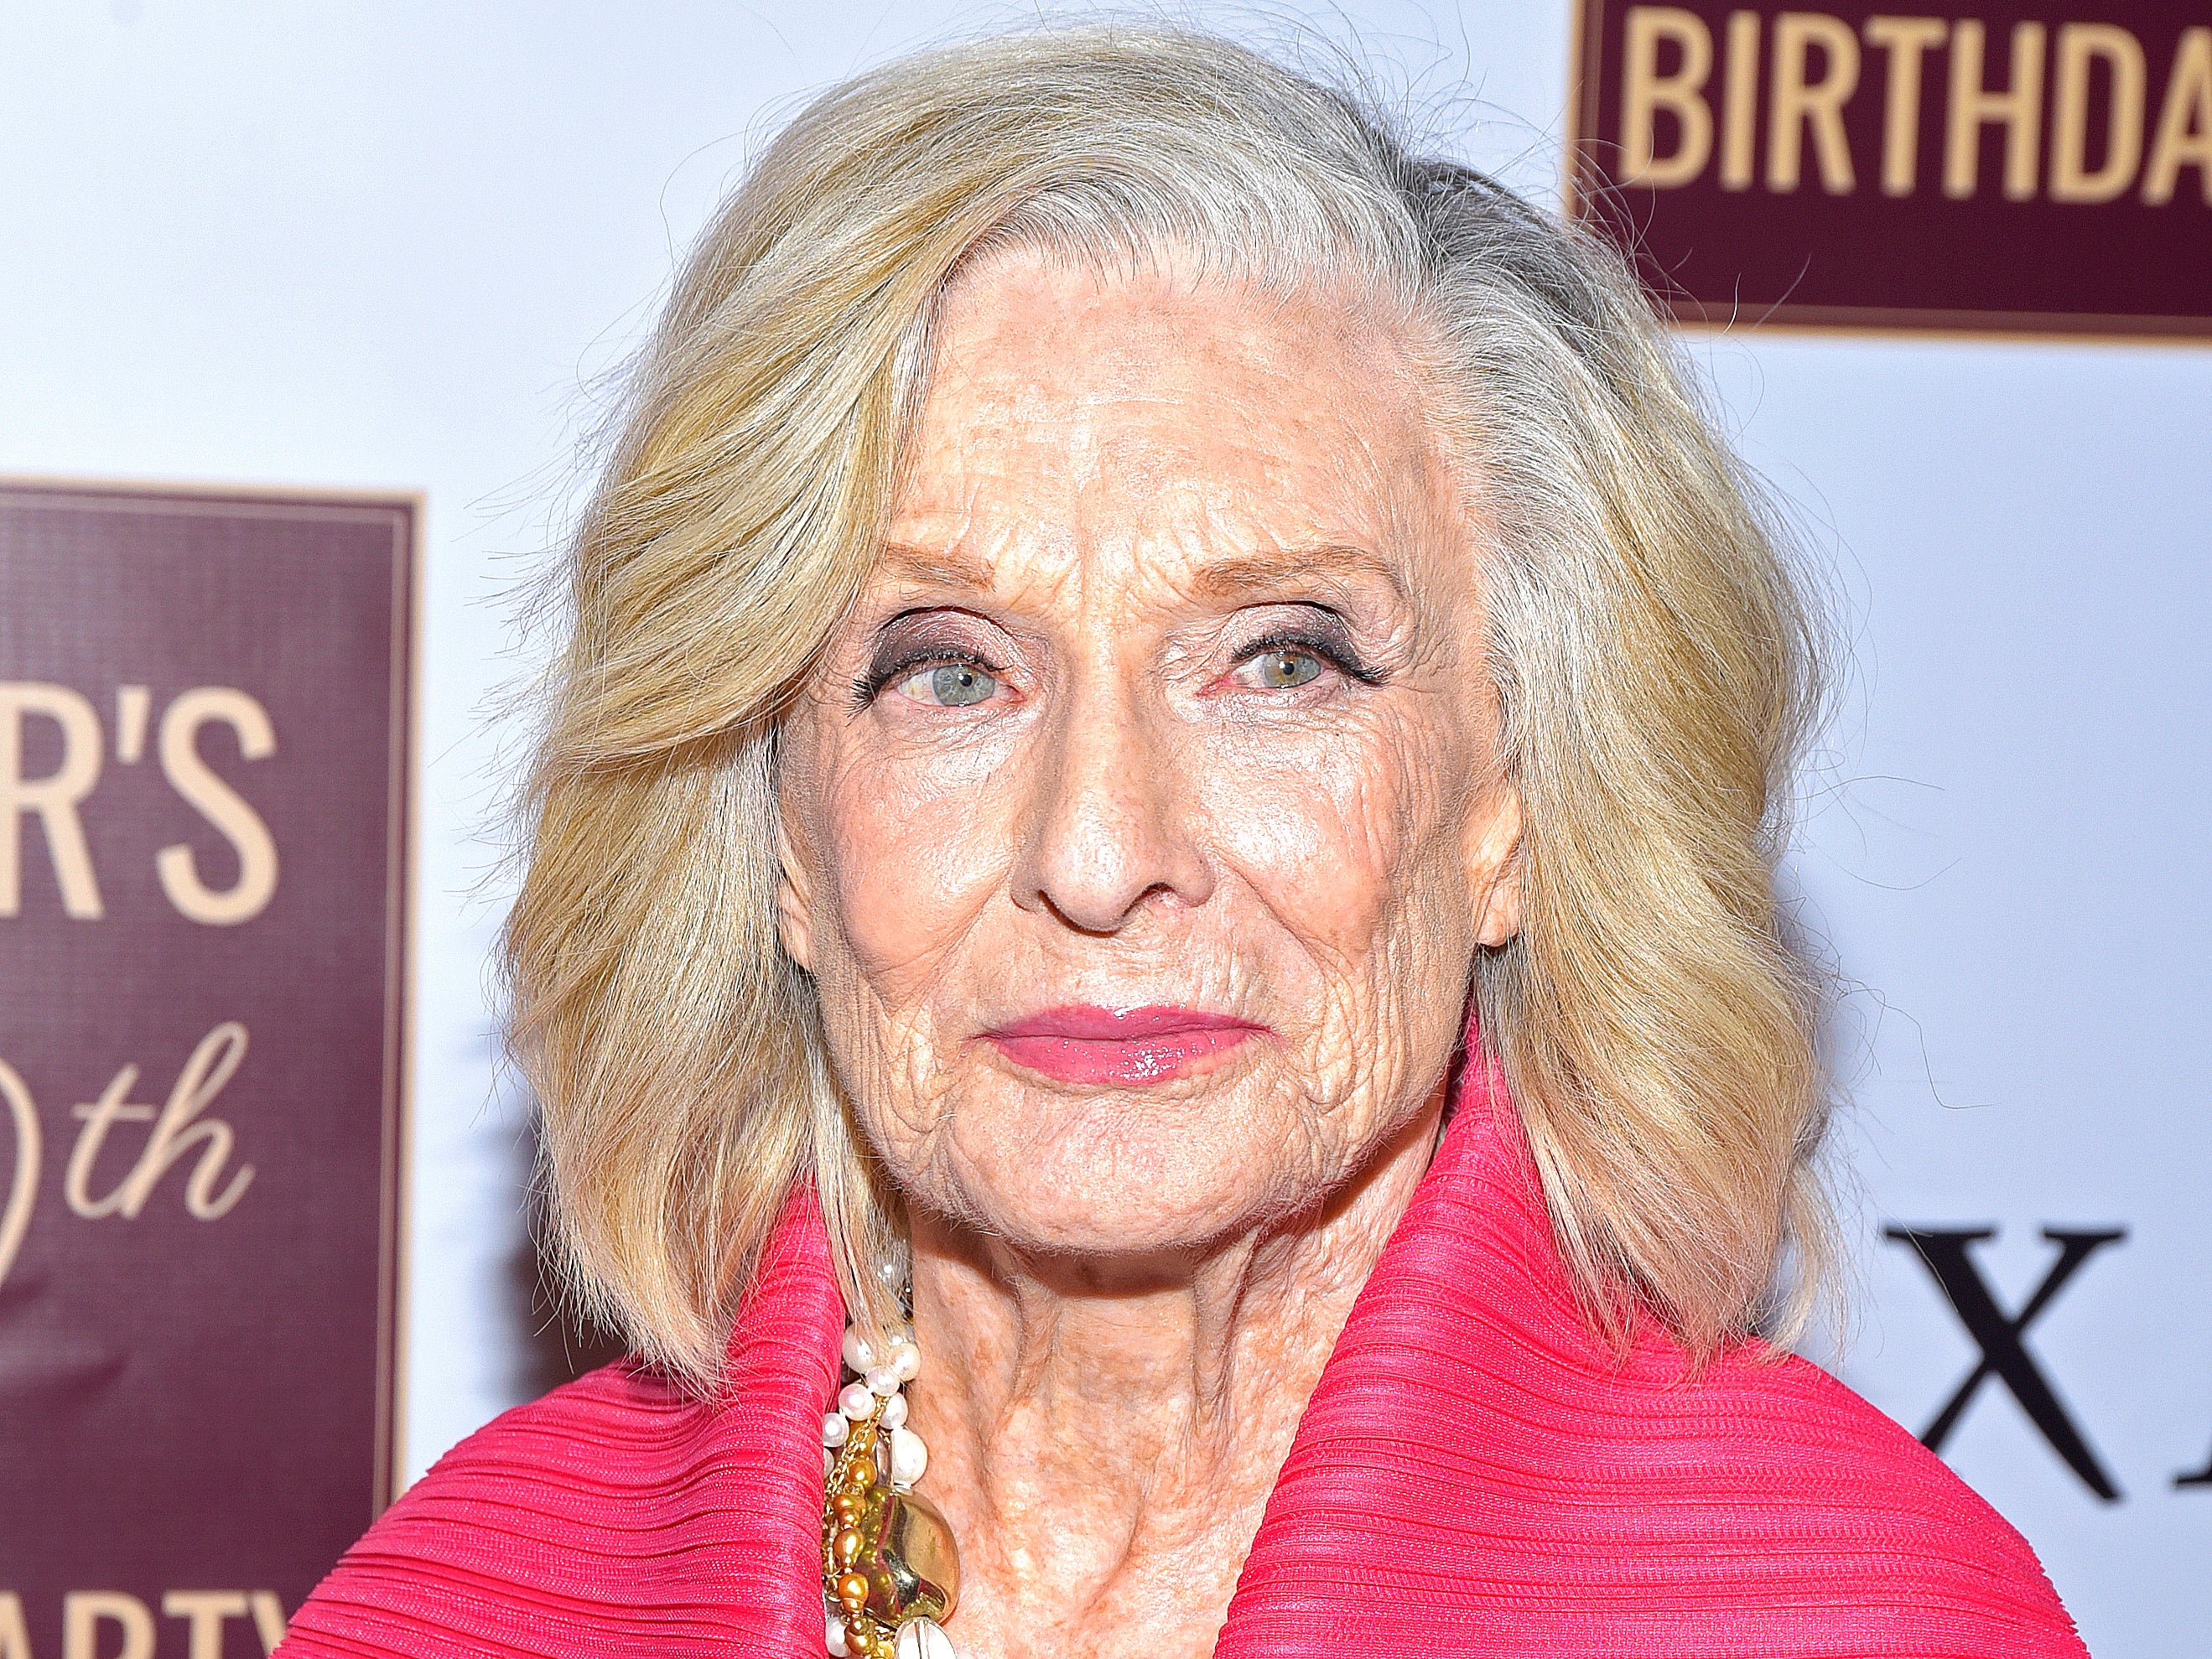 Cloris Leachman: Oscar-winning star of Young Frankenstein and The Mary Tyler Moore Show, dies aged 94